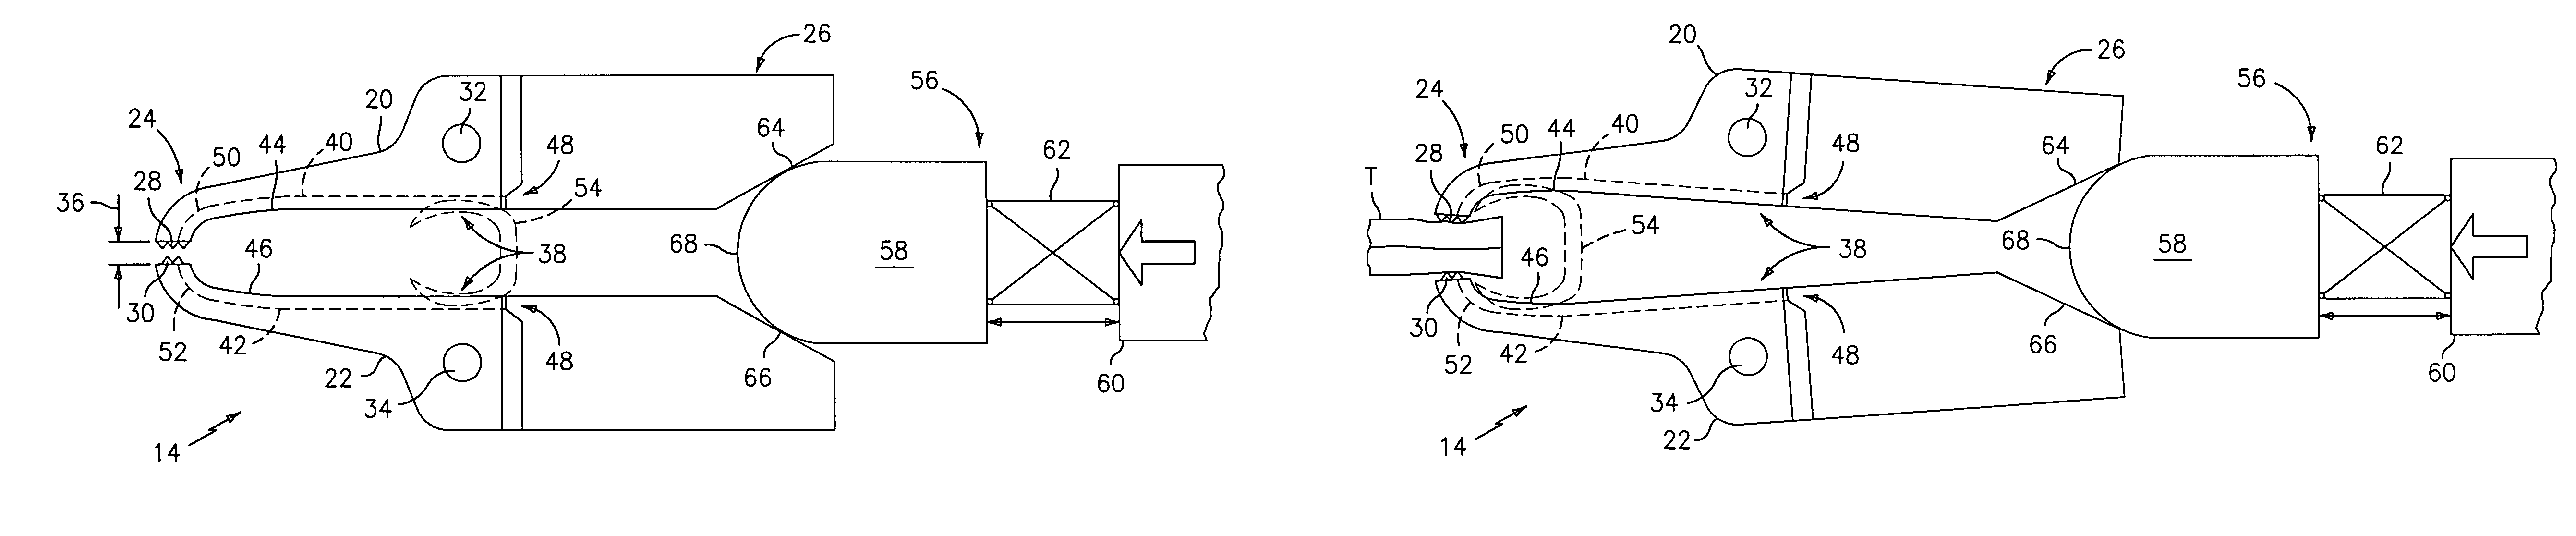 Tissue grasping and clipping/stapling device